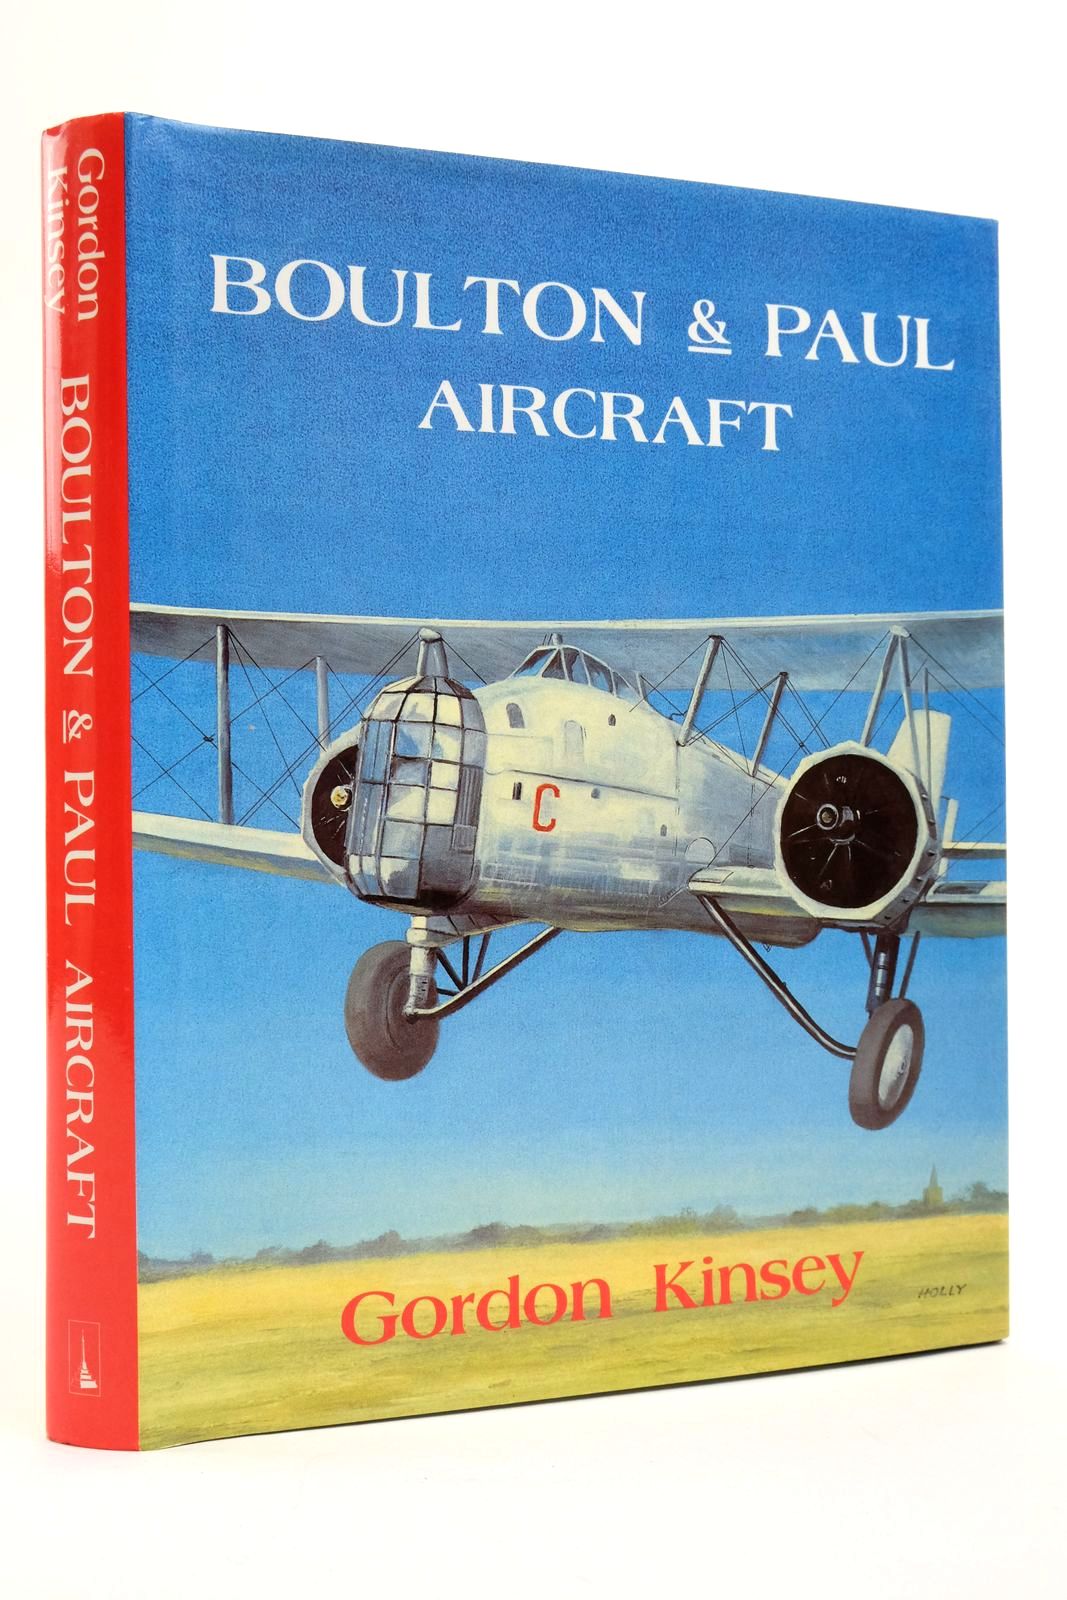 Photo of BOULTON & PAUL AIRCRAFT written by Kinsey, Gordon published by Terence Dalton Limited (STOCK CODE: 2138430)  for sale by Stella & Rose's Books